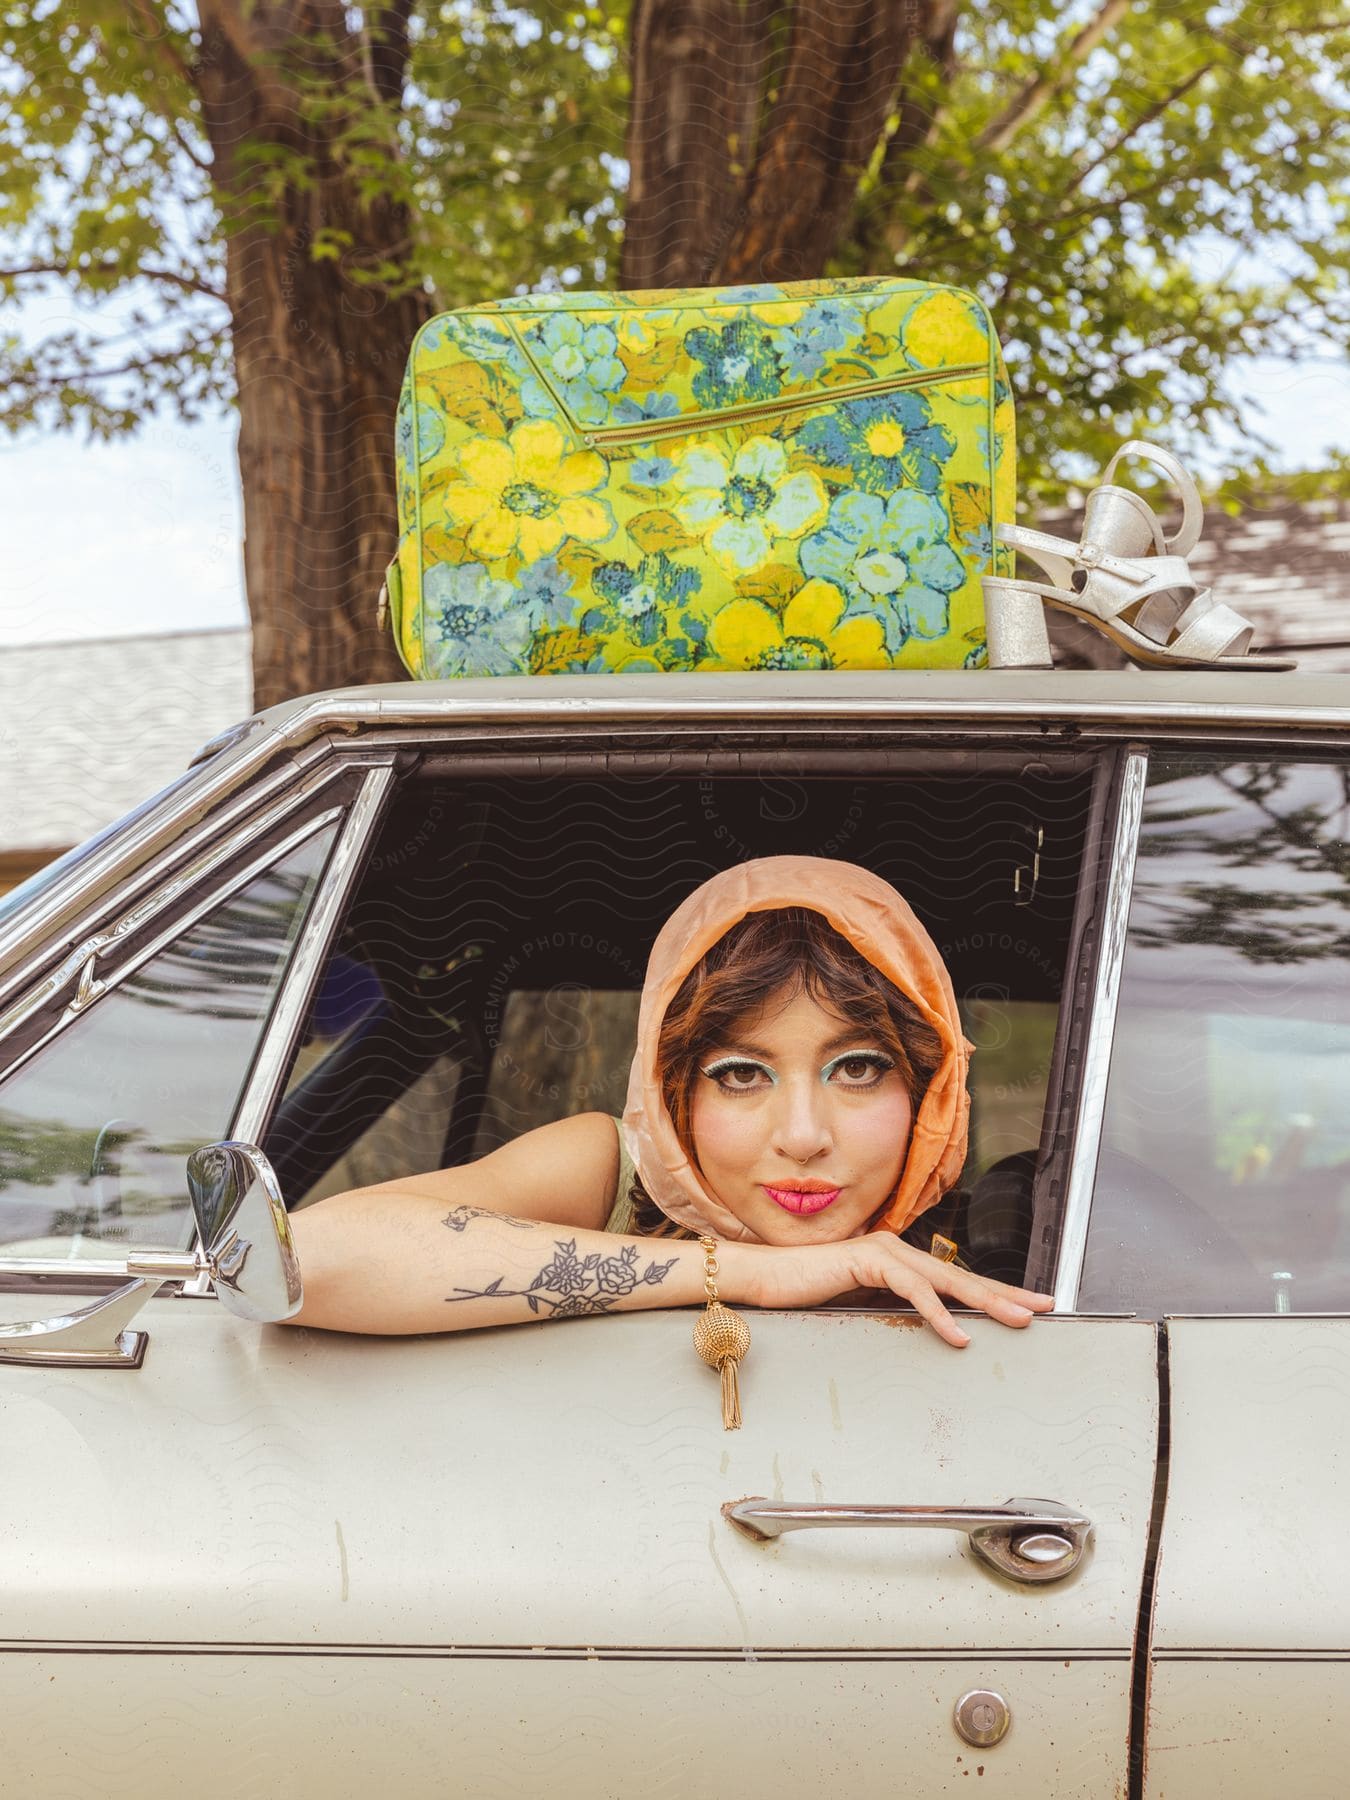 Stock photo of a person sitting in an old car with a floral suitcase on the roof.